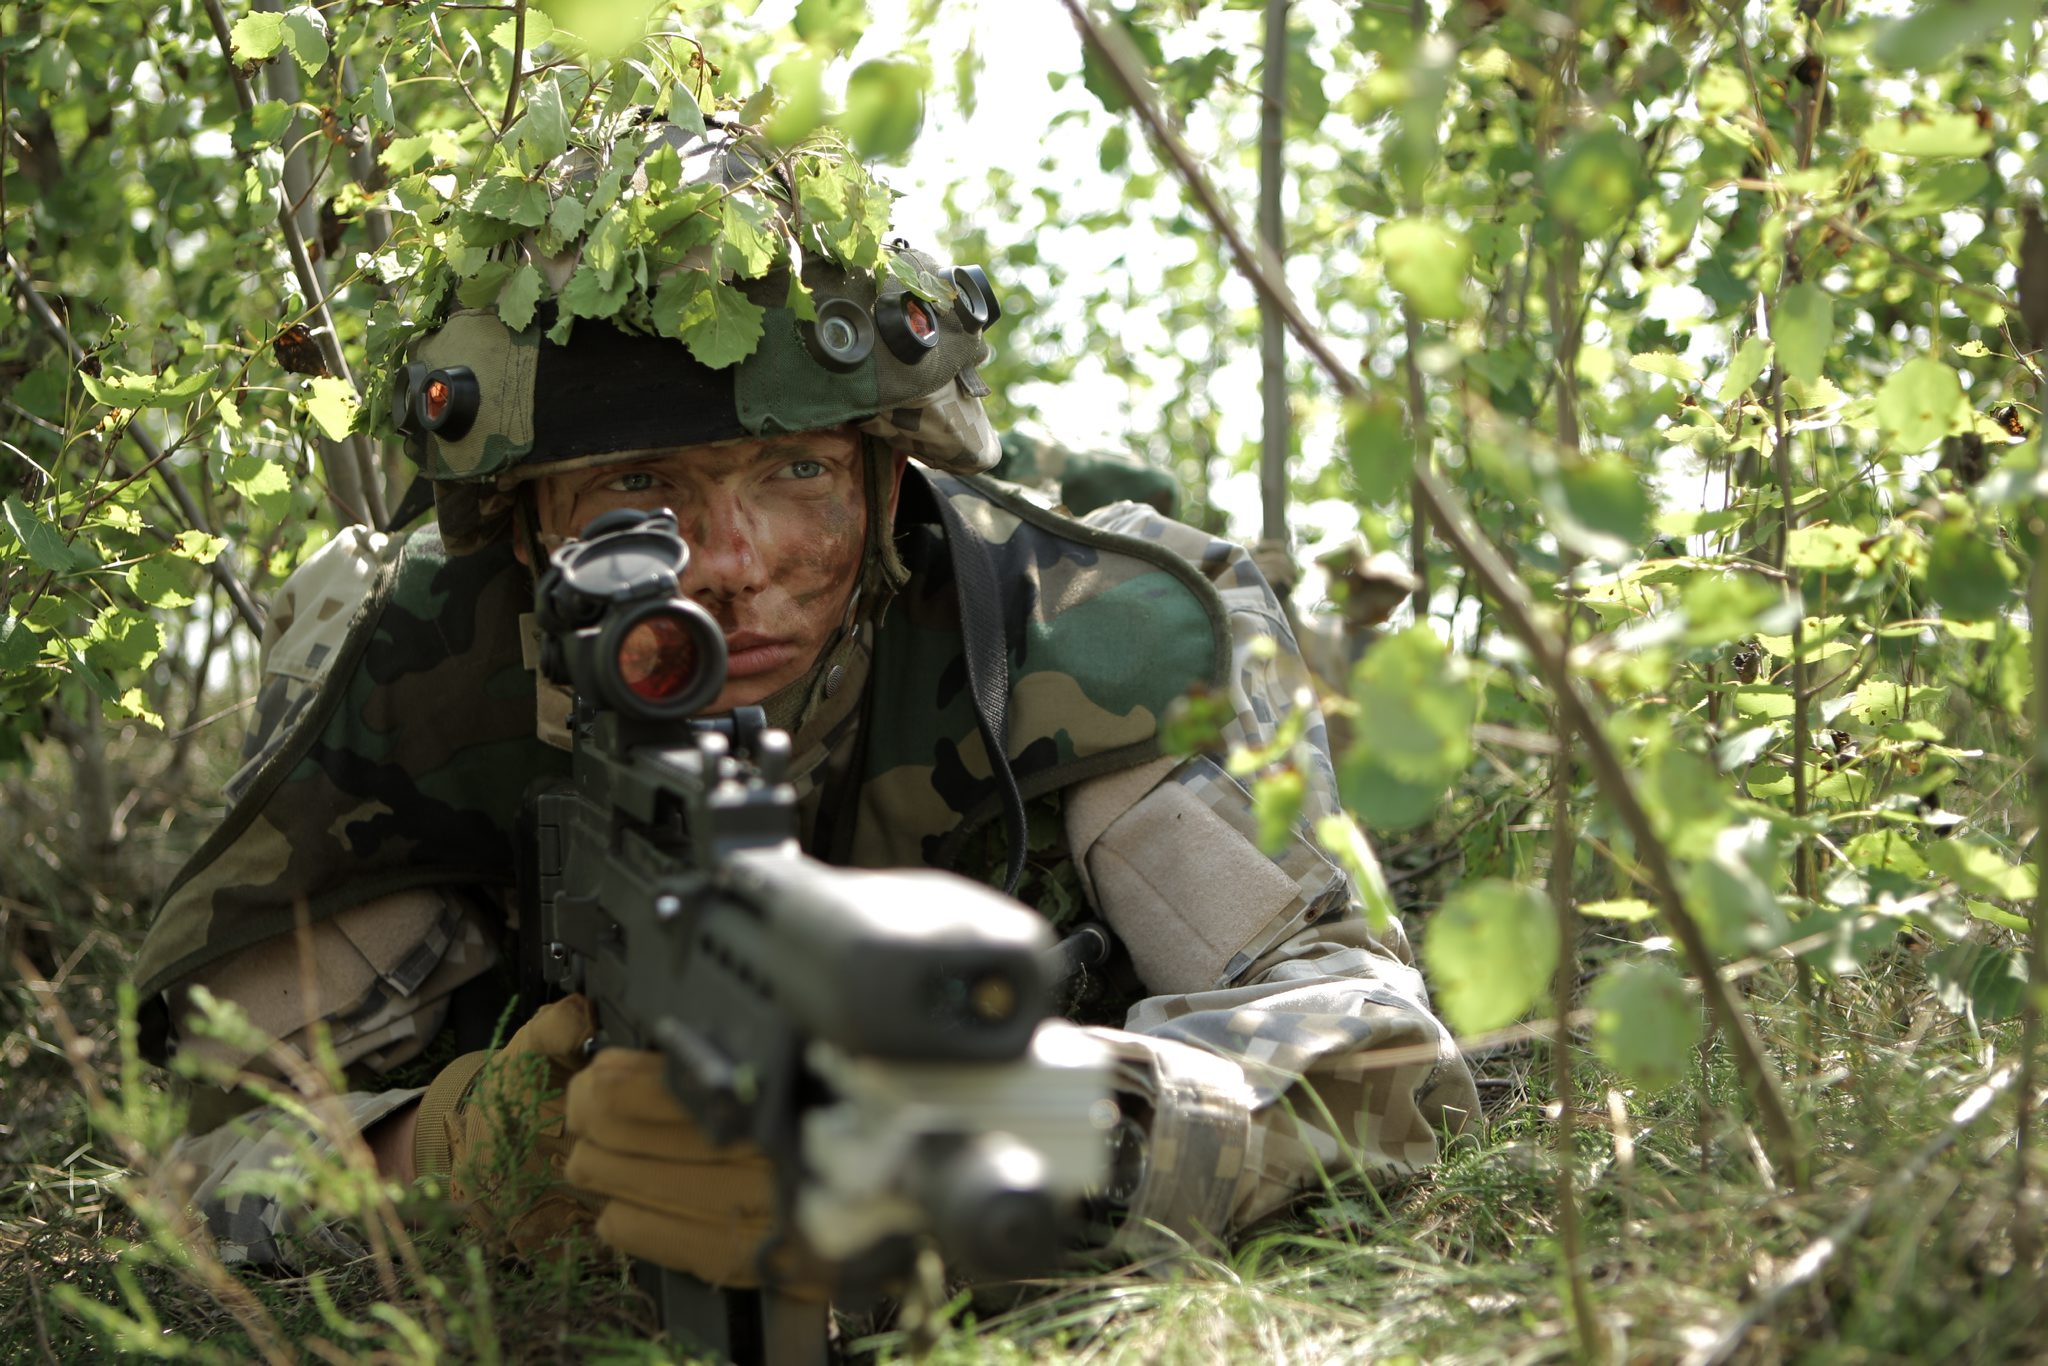 A_Latvian_soldier_waits_to_conduct_an_ambush_during_a_situational_training_exercise_in_Adai,_Latvia,_June_4,_2013,_during_exercise_Saber_Strike_2013_130604-O-ZZ999-004.jpg